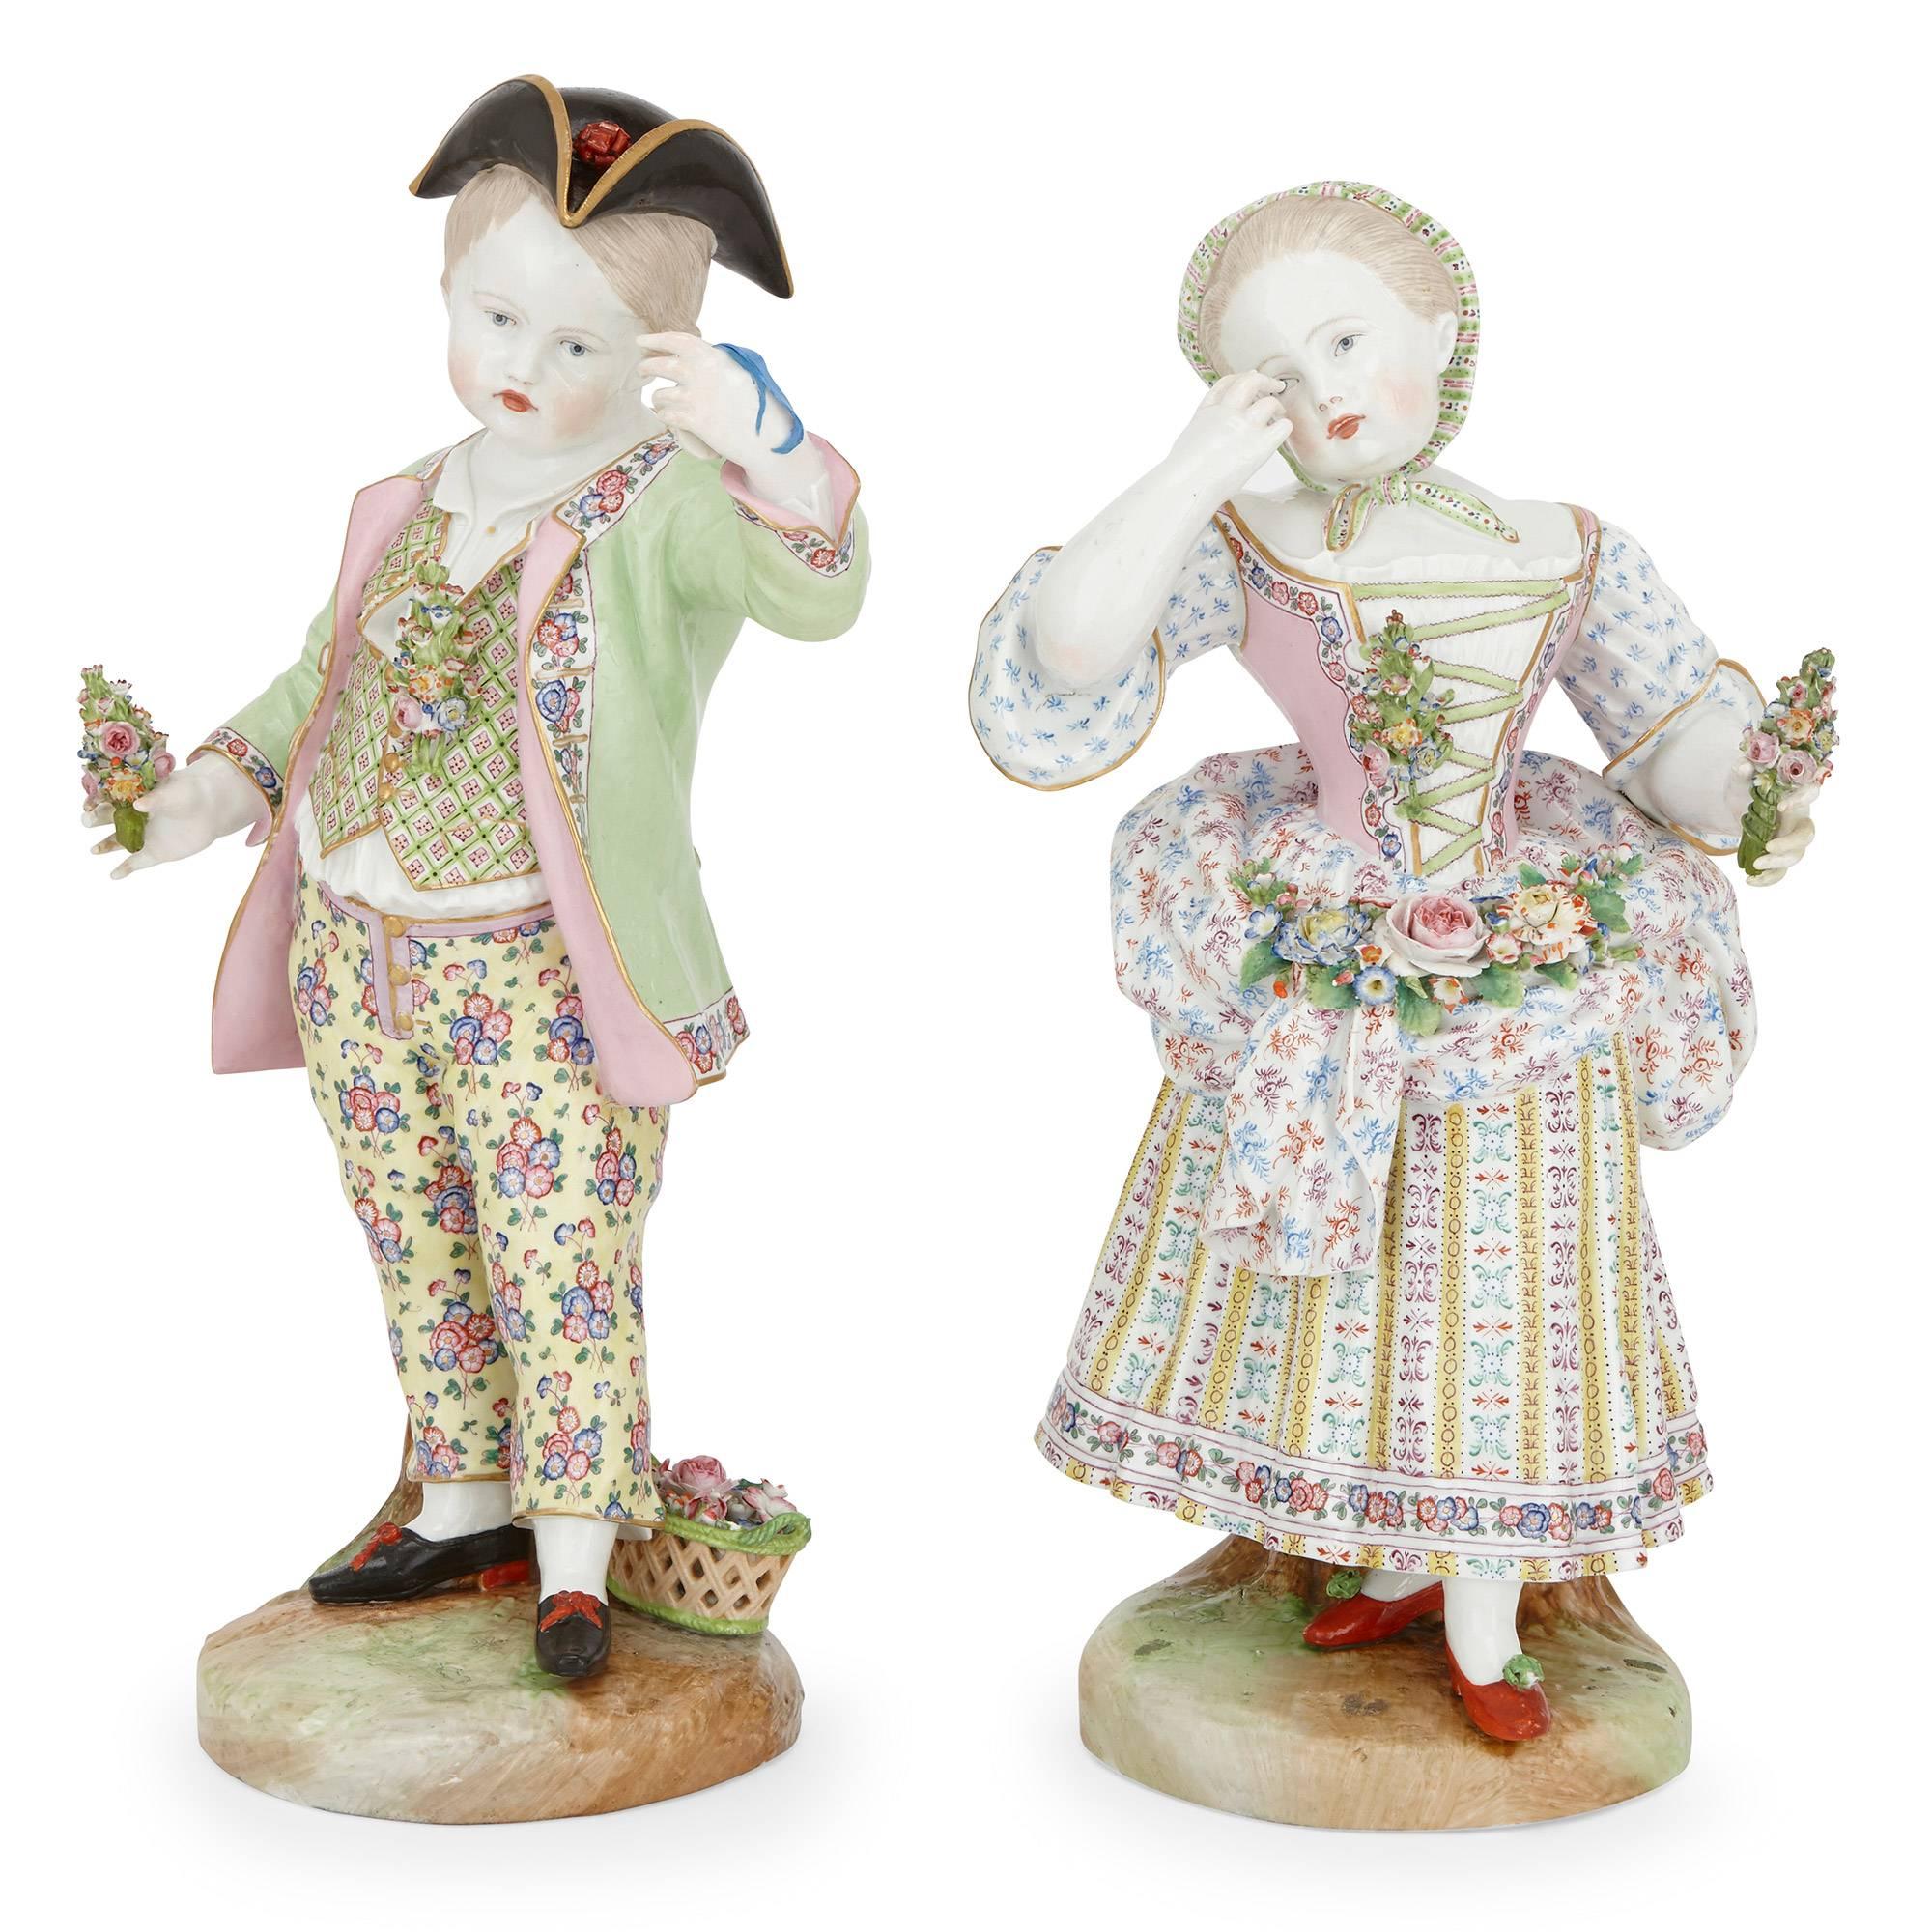 These charming antique Meissen style Porcelain figures are rendered in the elegant Rococo style, depicting a courting couple dressed in 18th century clothes and holding flowers; each figure with blue crossed sword marks.

Taller figure height 44cm,